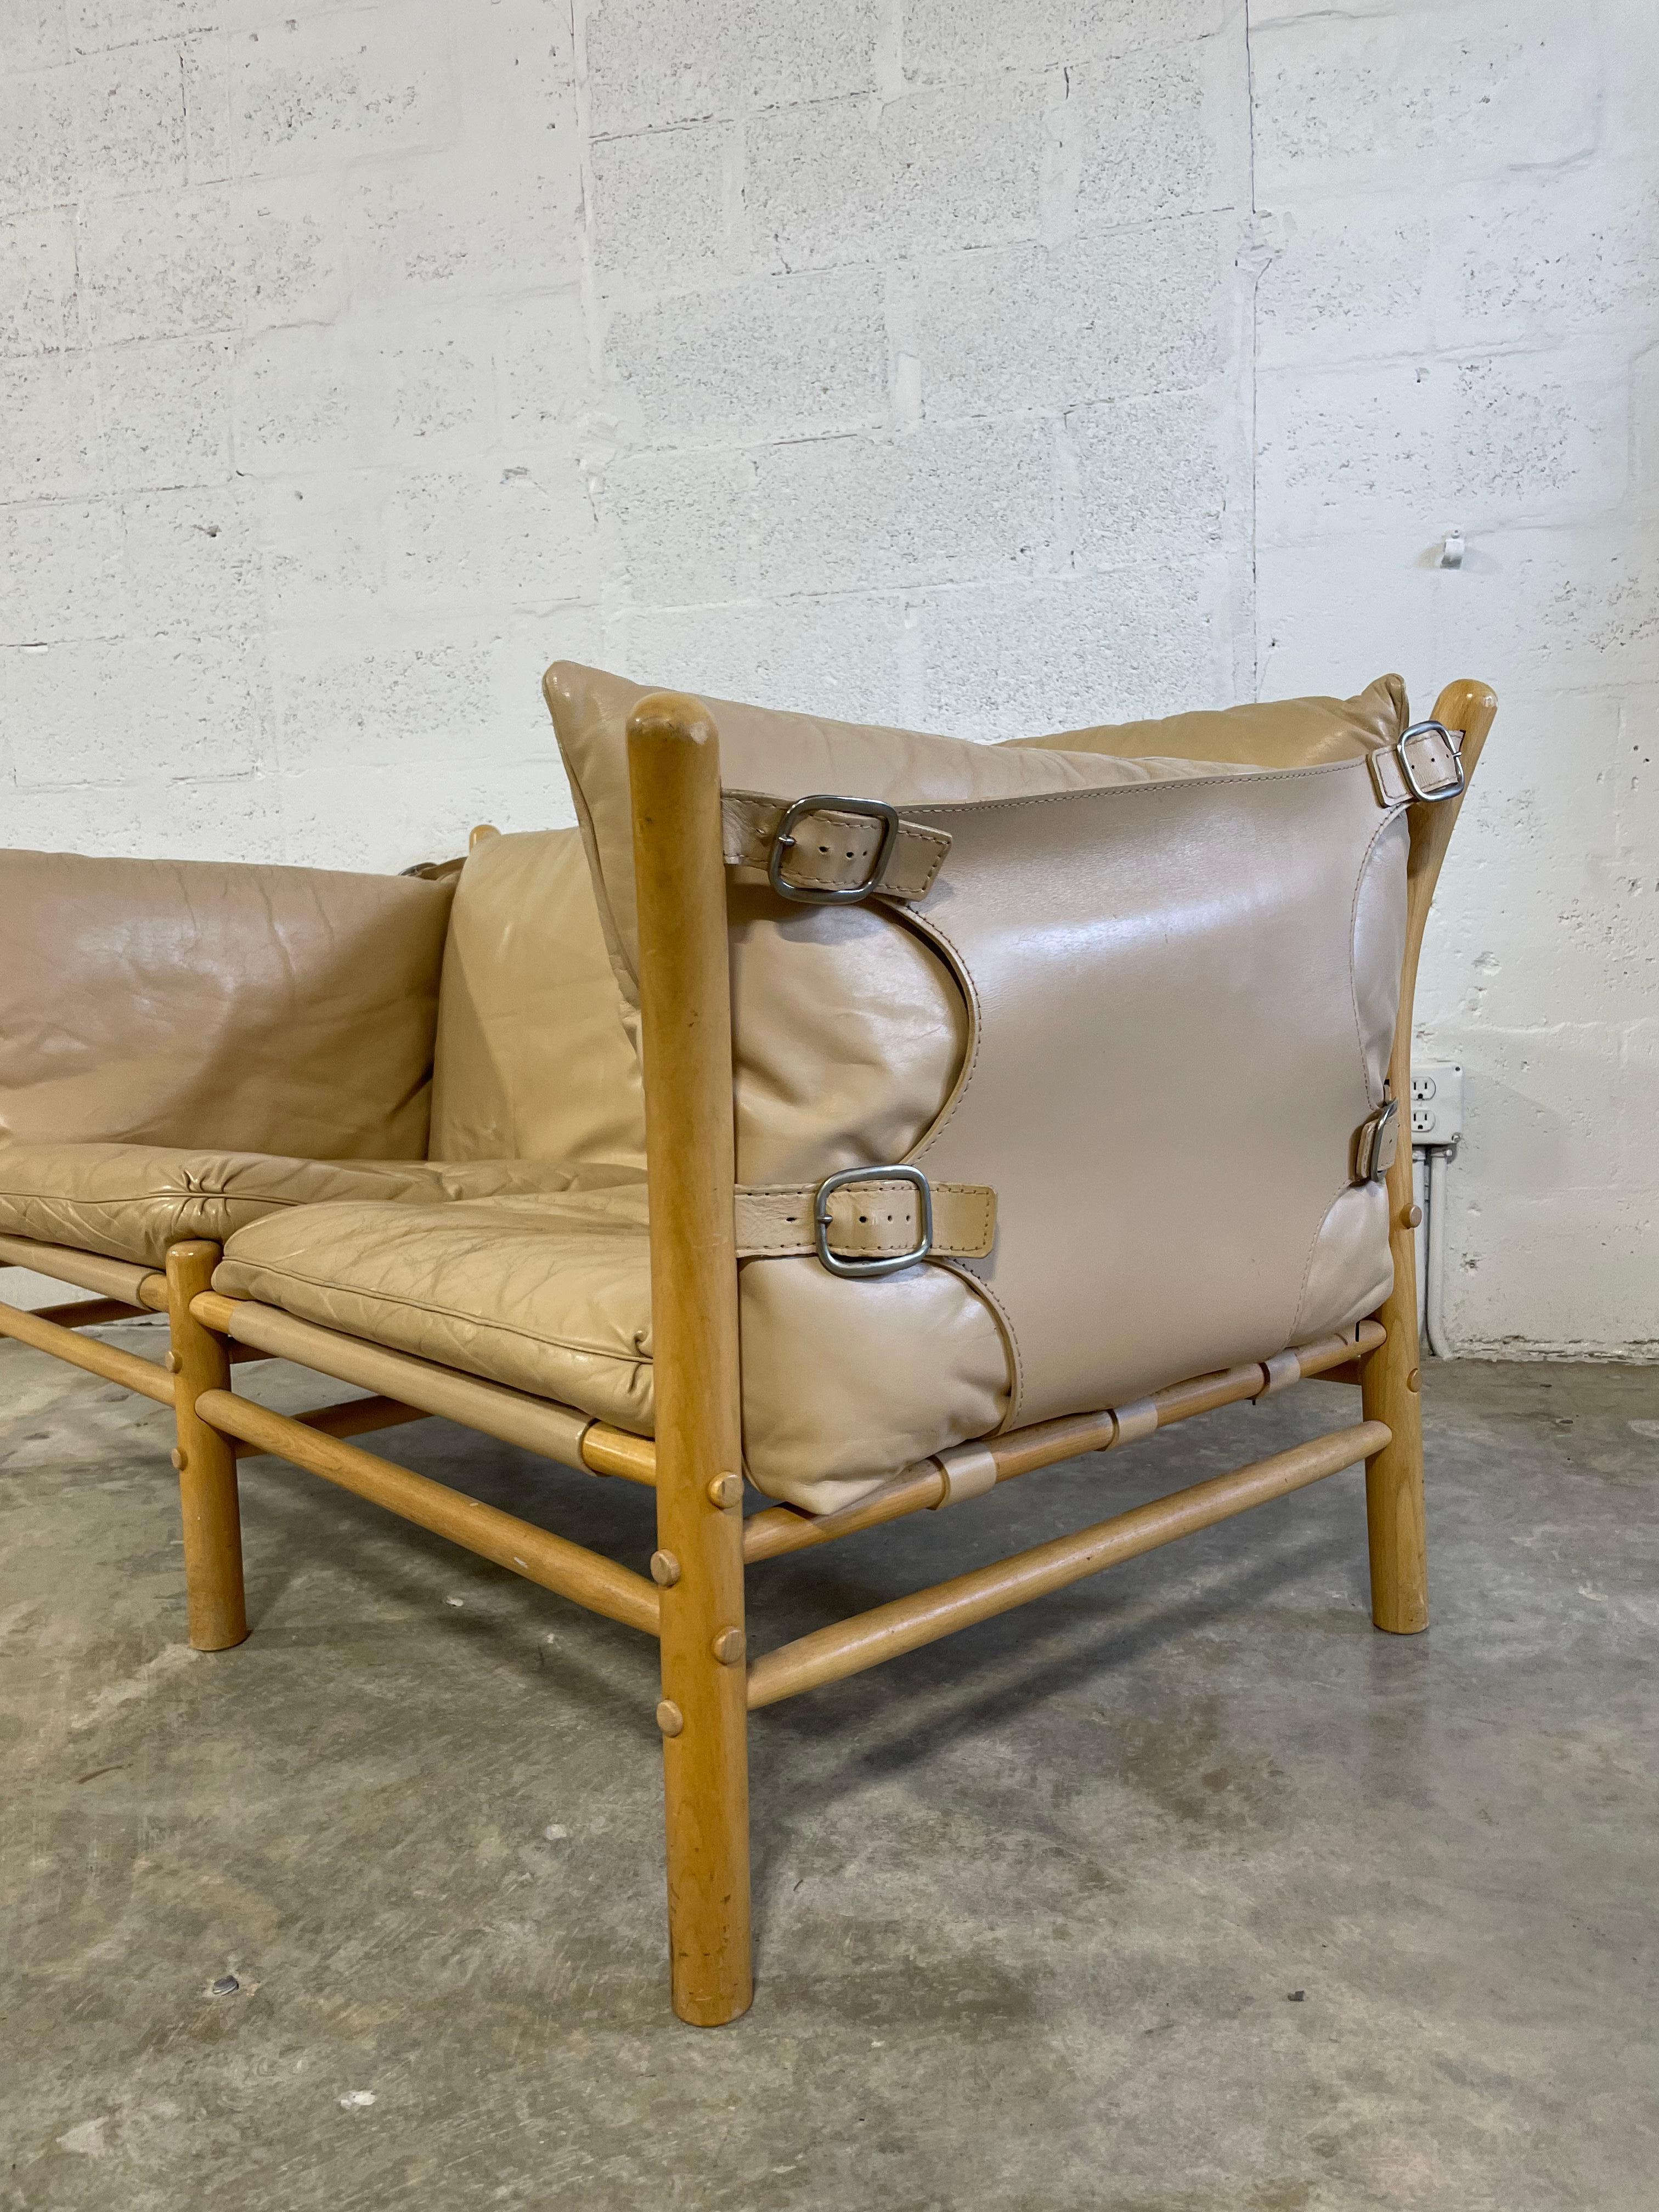 Arne Norell Ilona Safari Loveseat or Two-person Sofa. Made in Sweden. Original leather cushions. Hard to find color. Patina on leather. Labeled. Leather sling on sides and back, loose cushions. Manufactured by Aneby Møbler. 